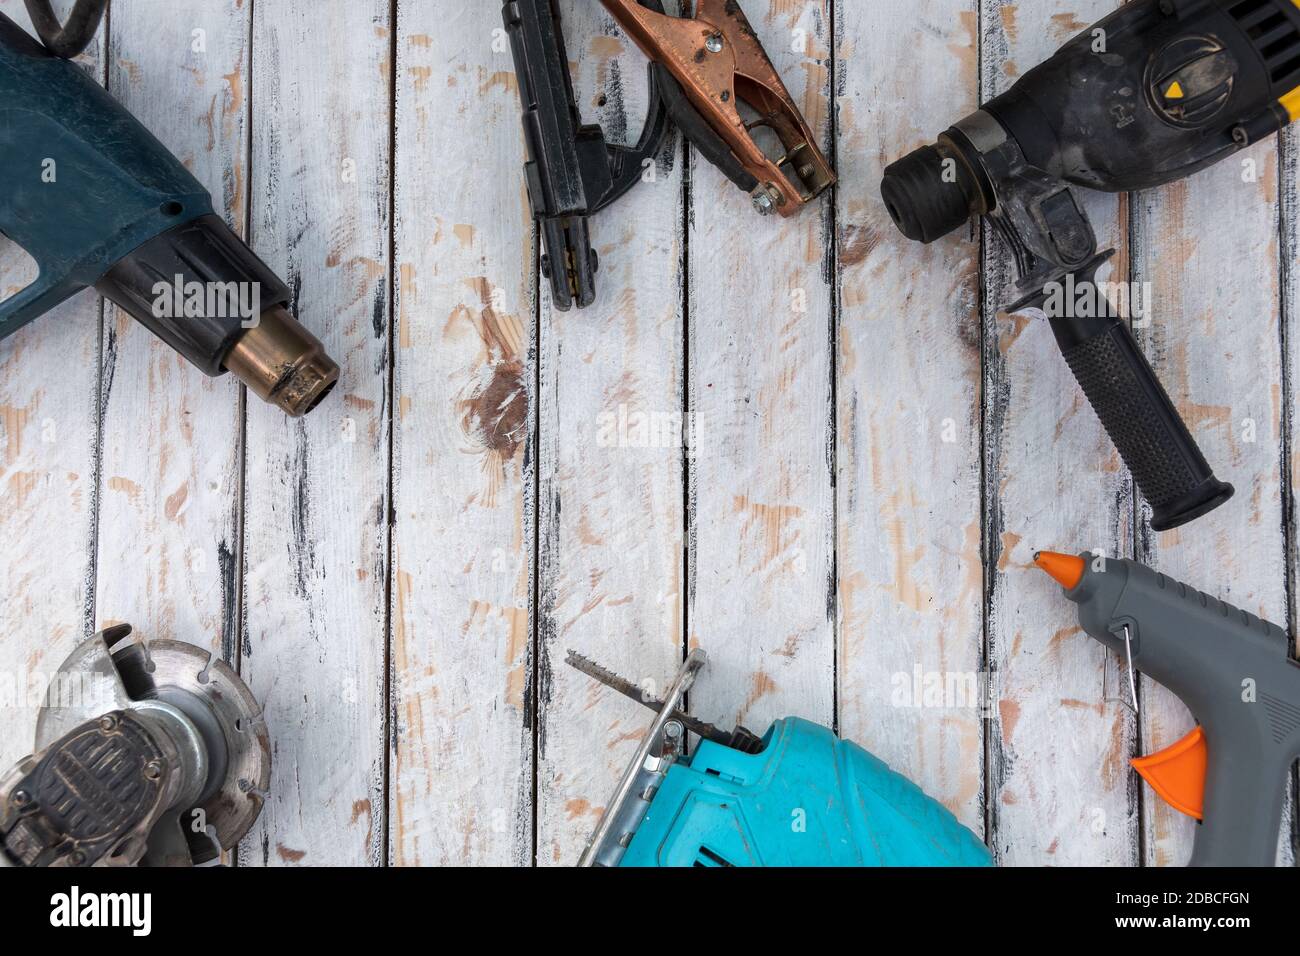 many assorted hand tools for rustic jobs Stock Photo